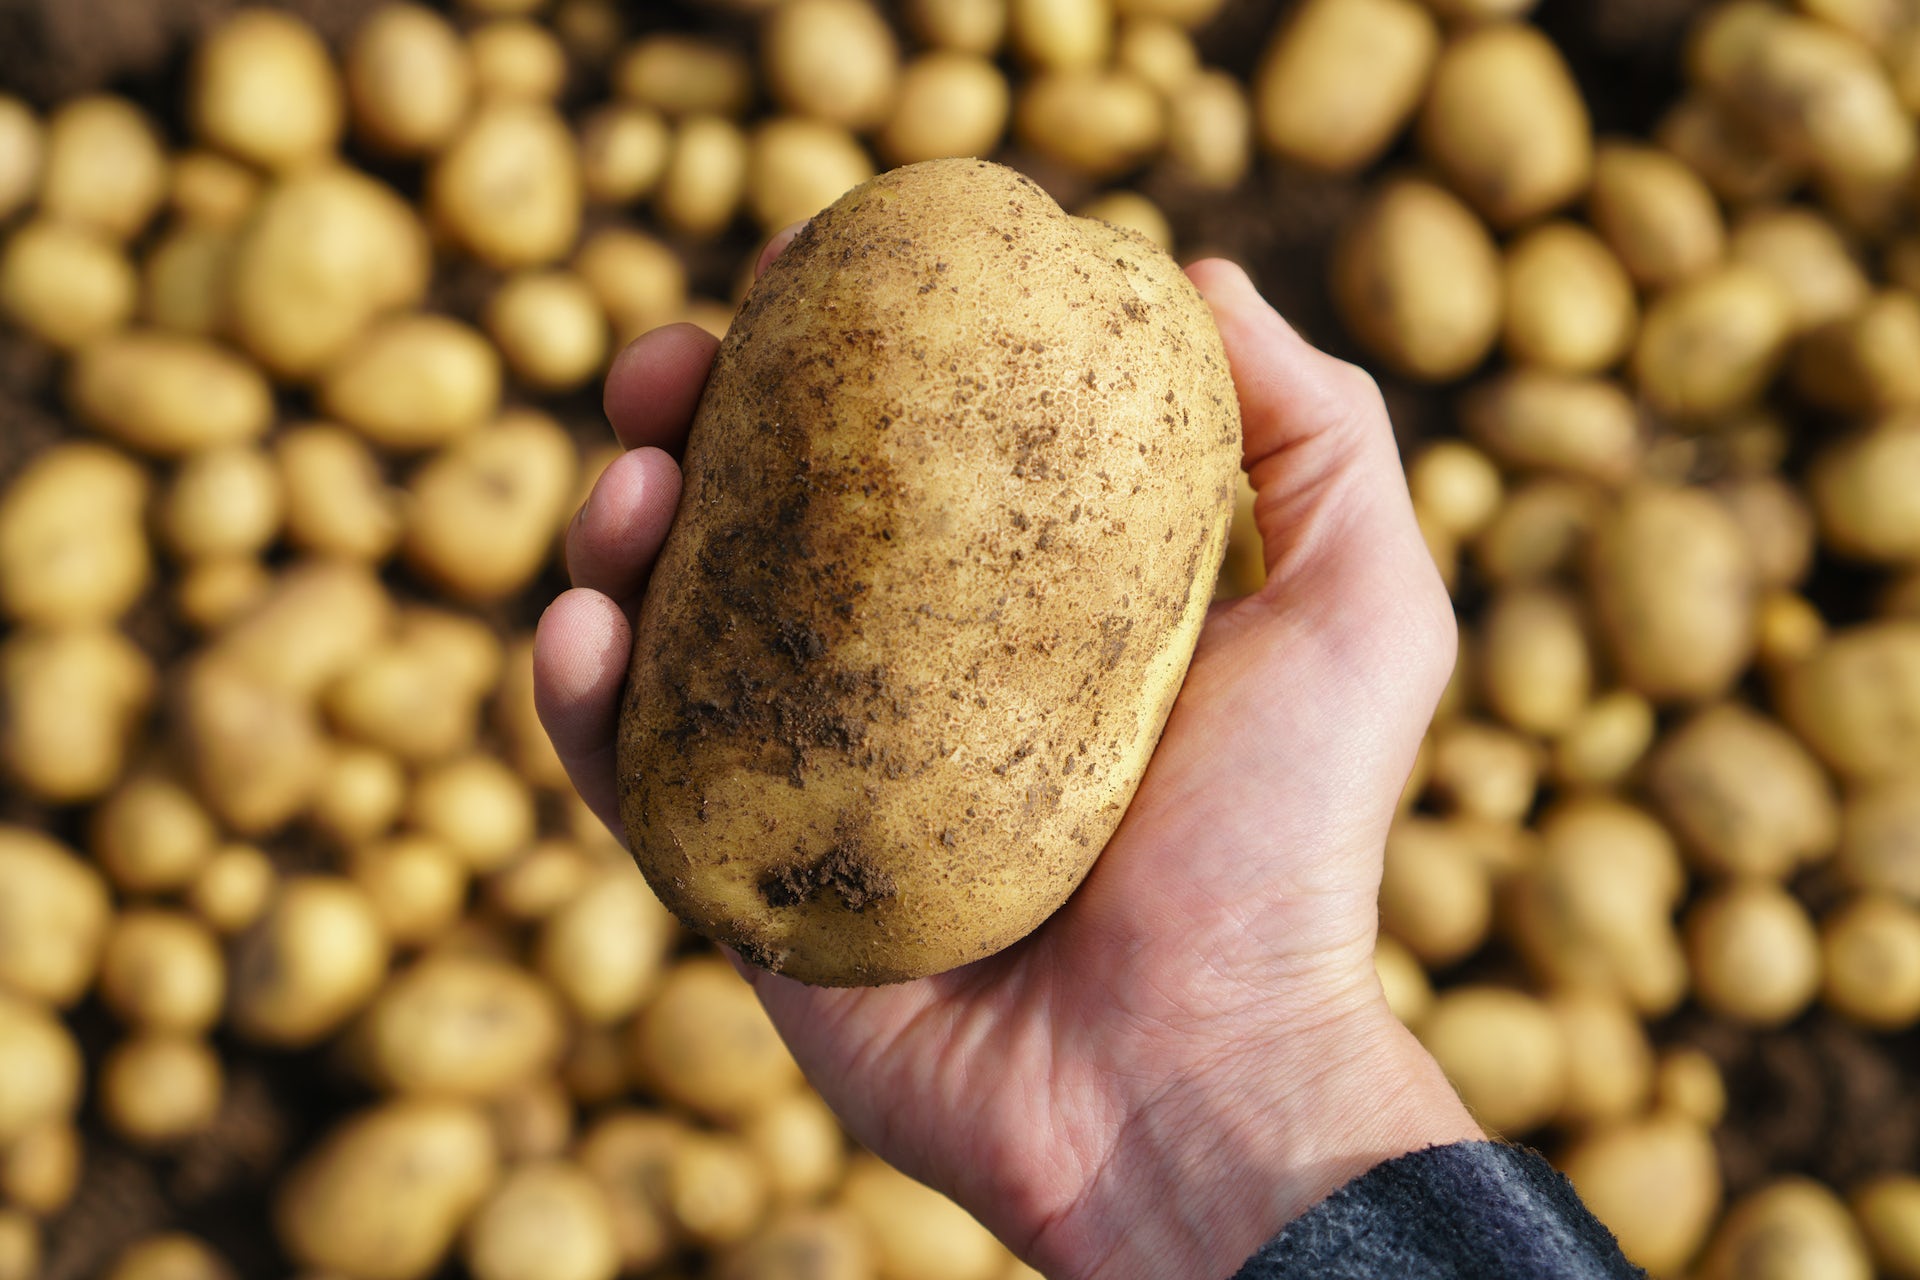 Six reasons why potatoes are good for you